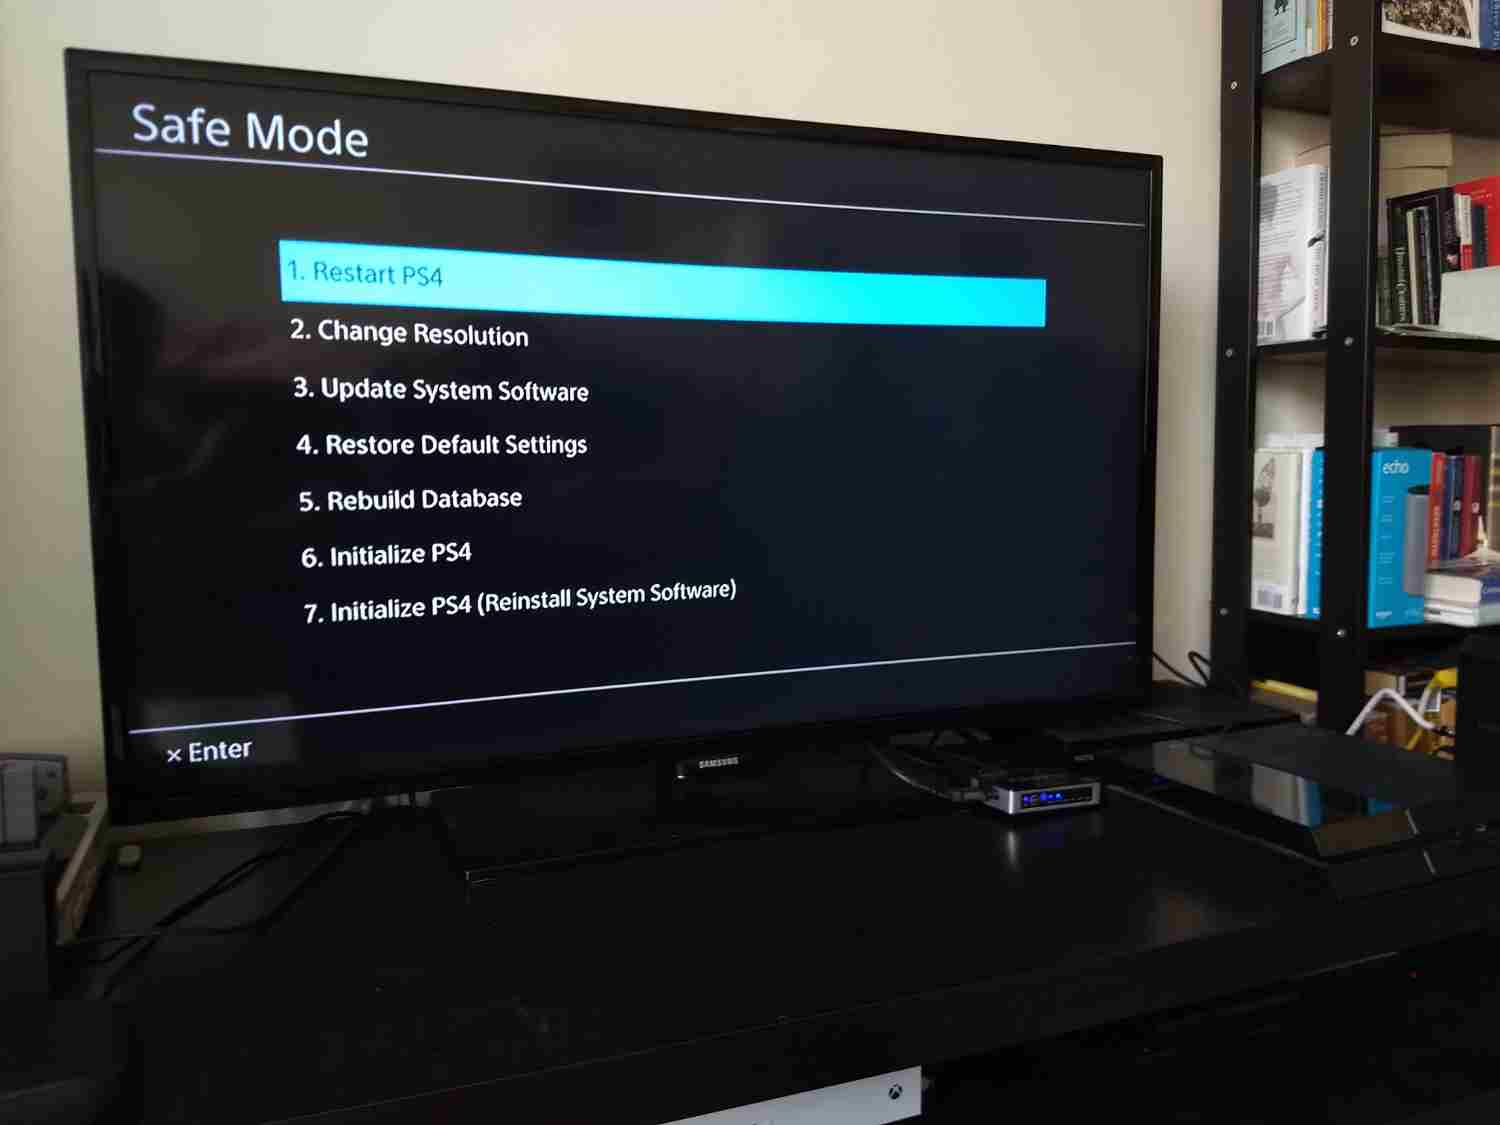 Initialize PS4 in Safe mode